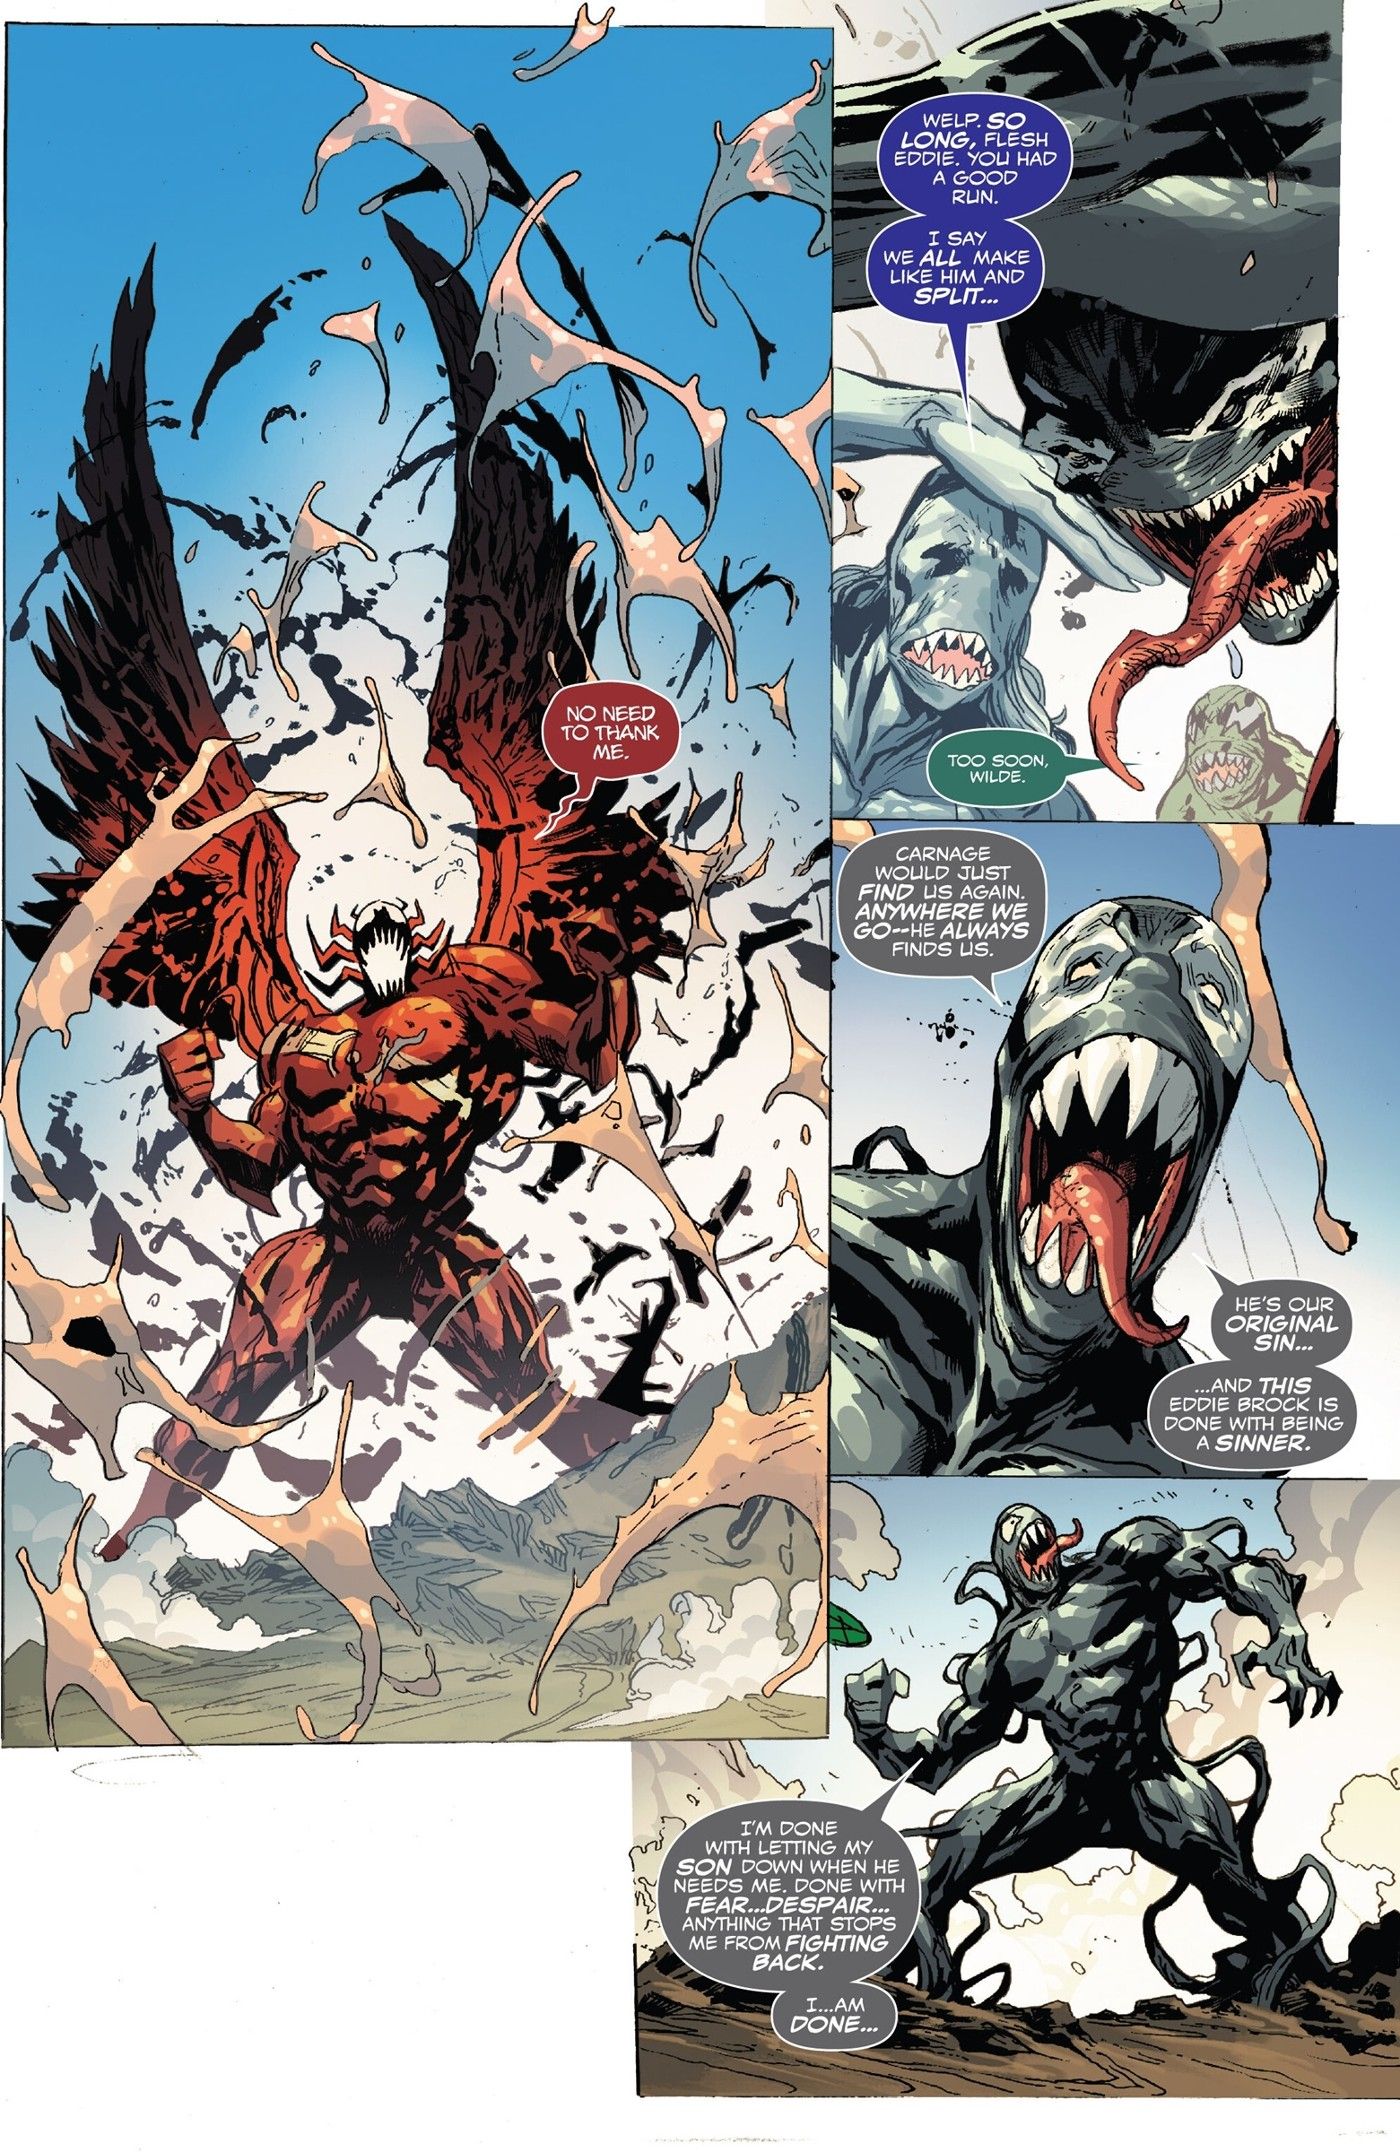 Four panels of symbiotes fighting Carnage